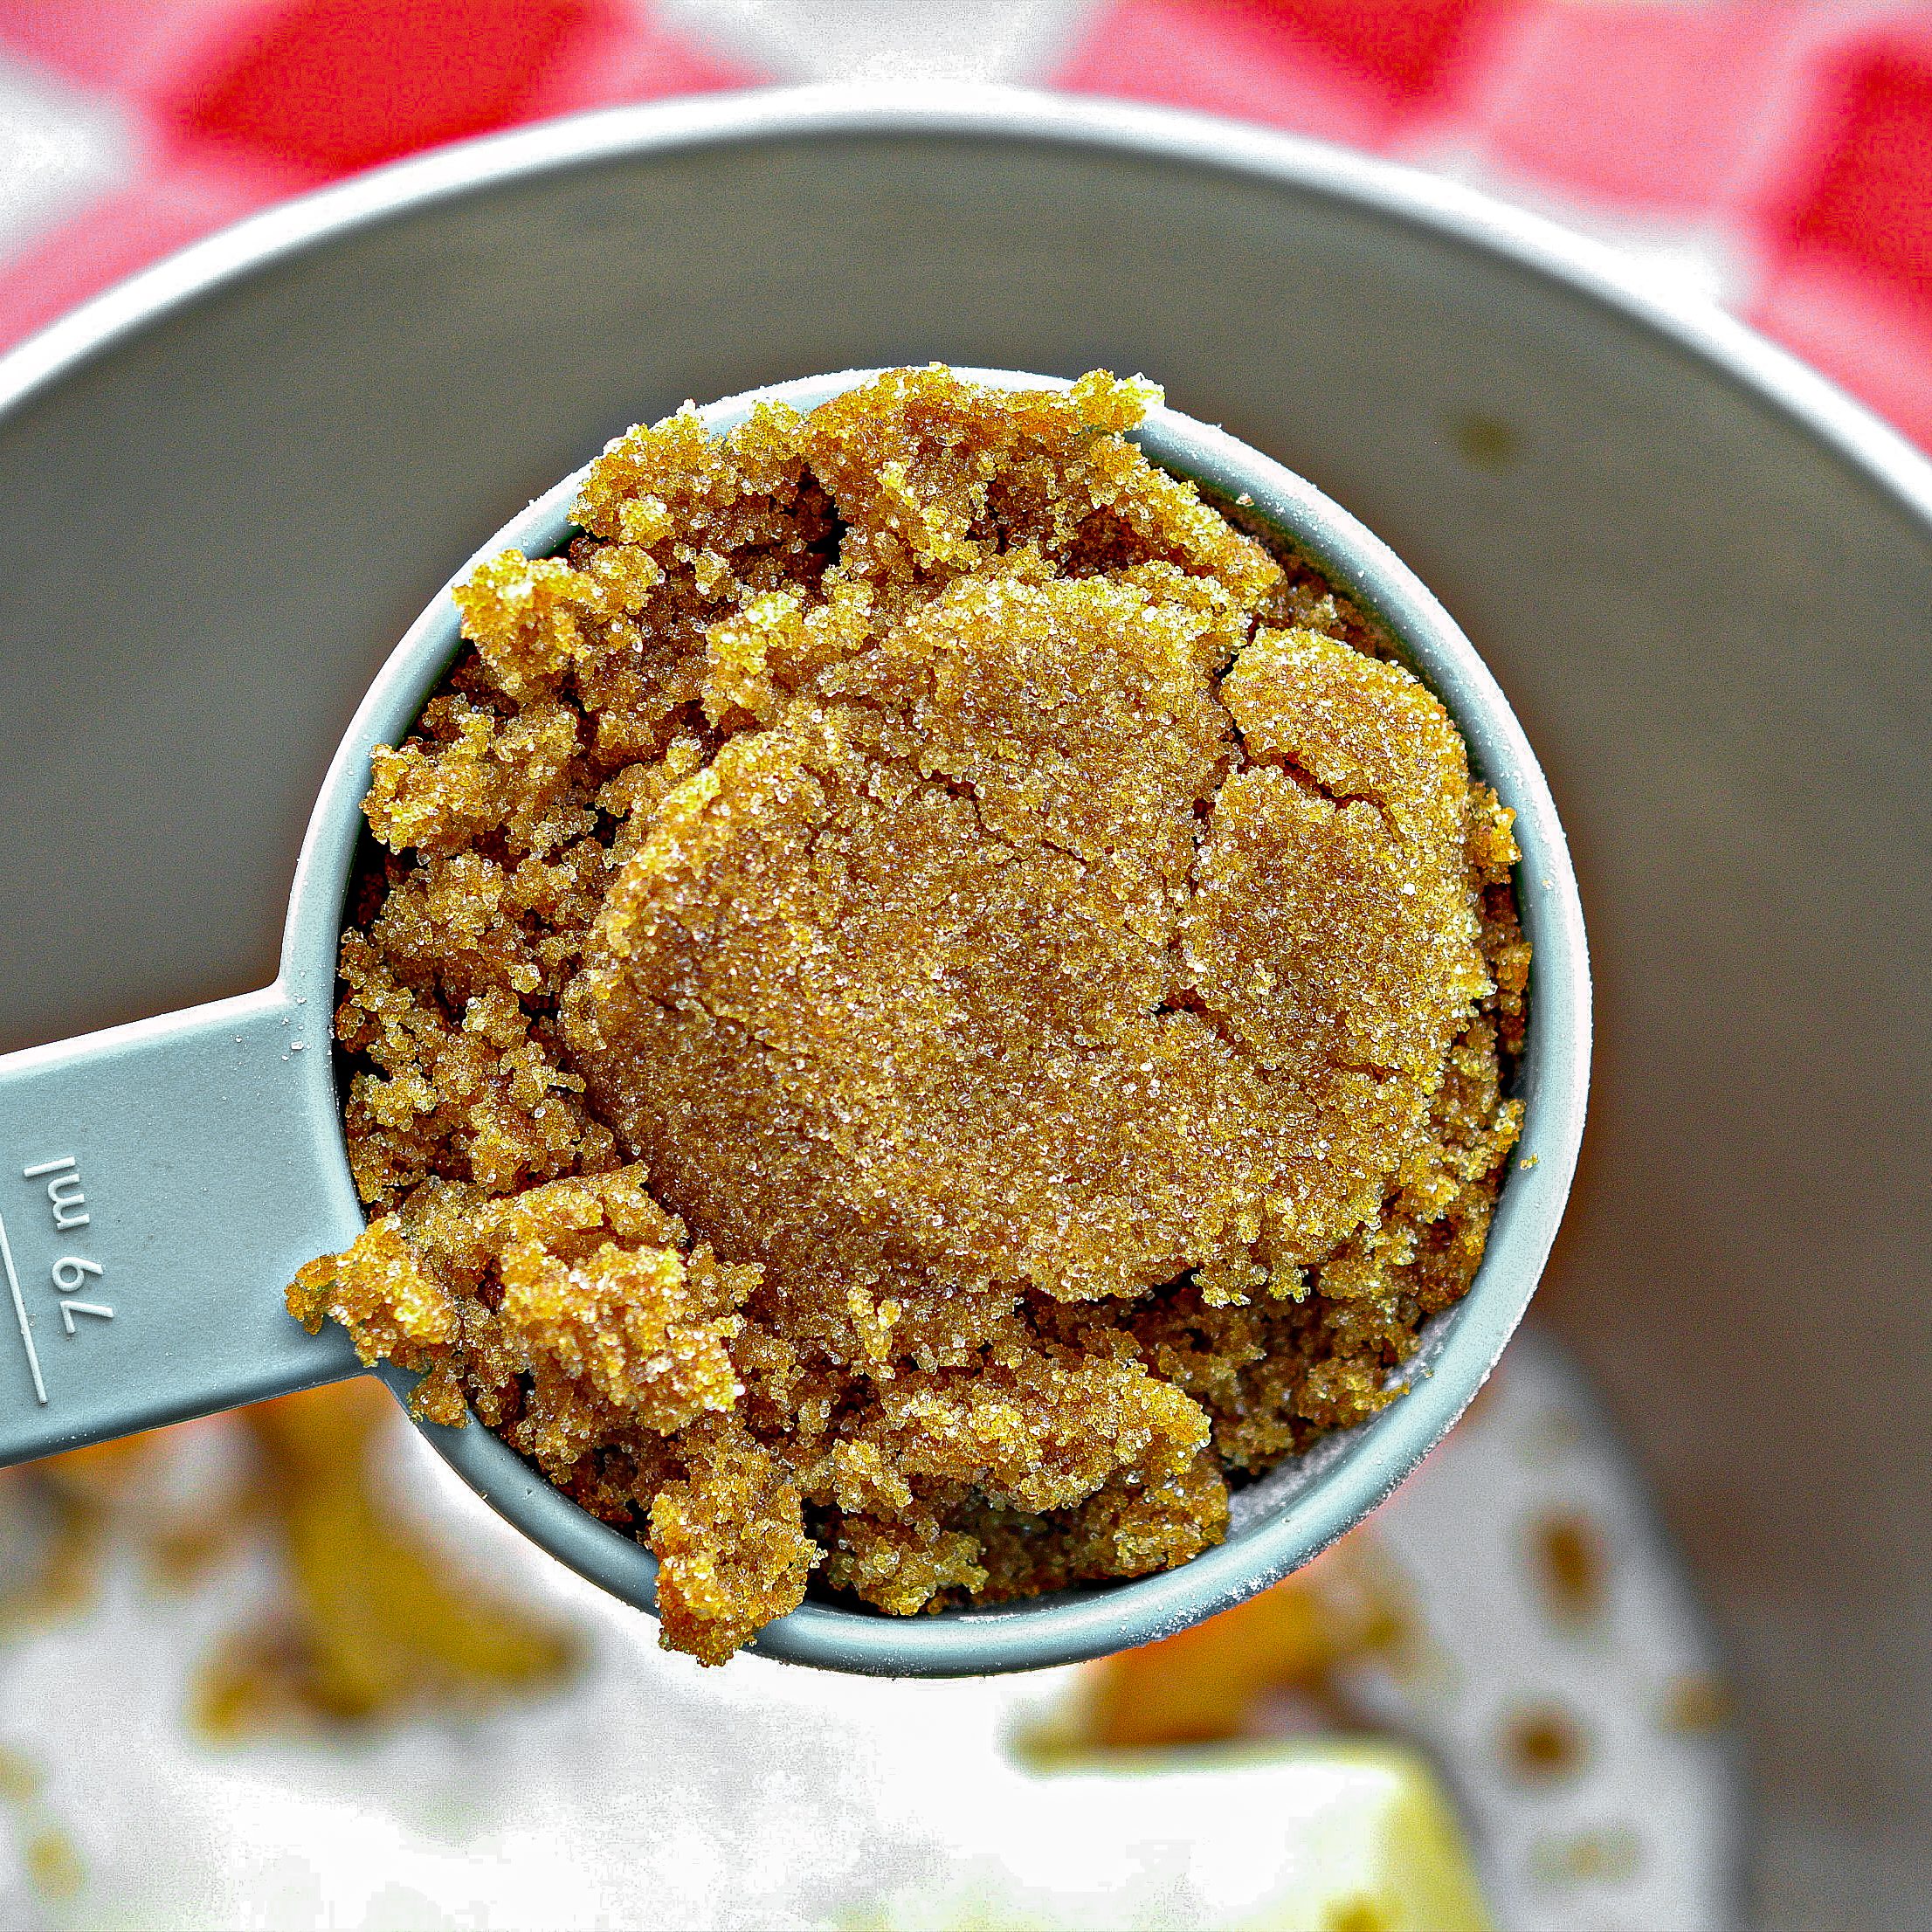 Add the sweet potato, butter, granulated sugar, brown sugar, and vanilla to a mixing bowl and beat on high until smooth.